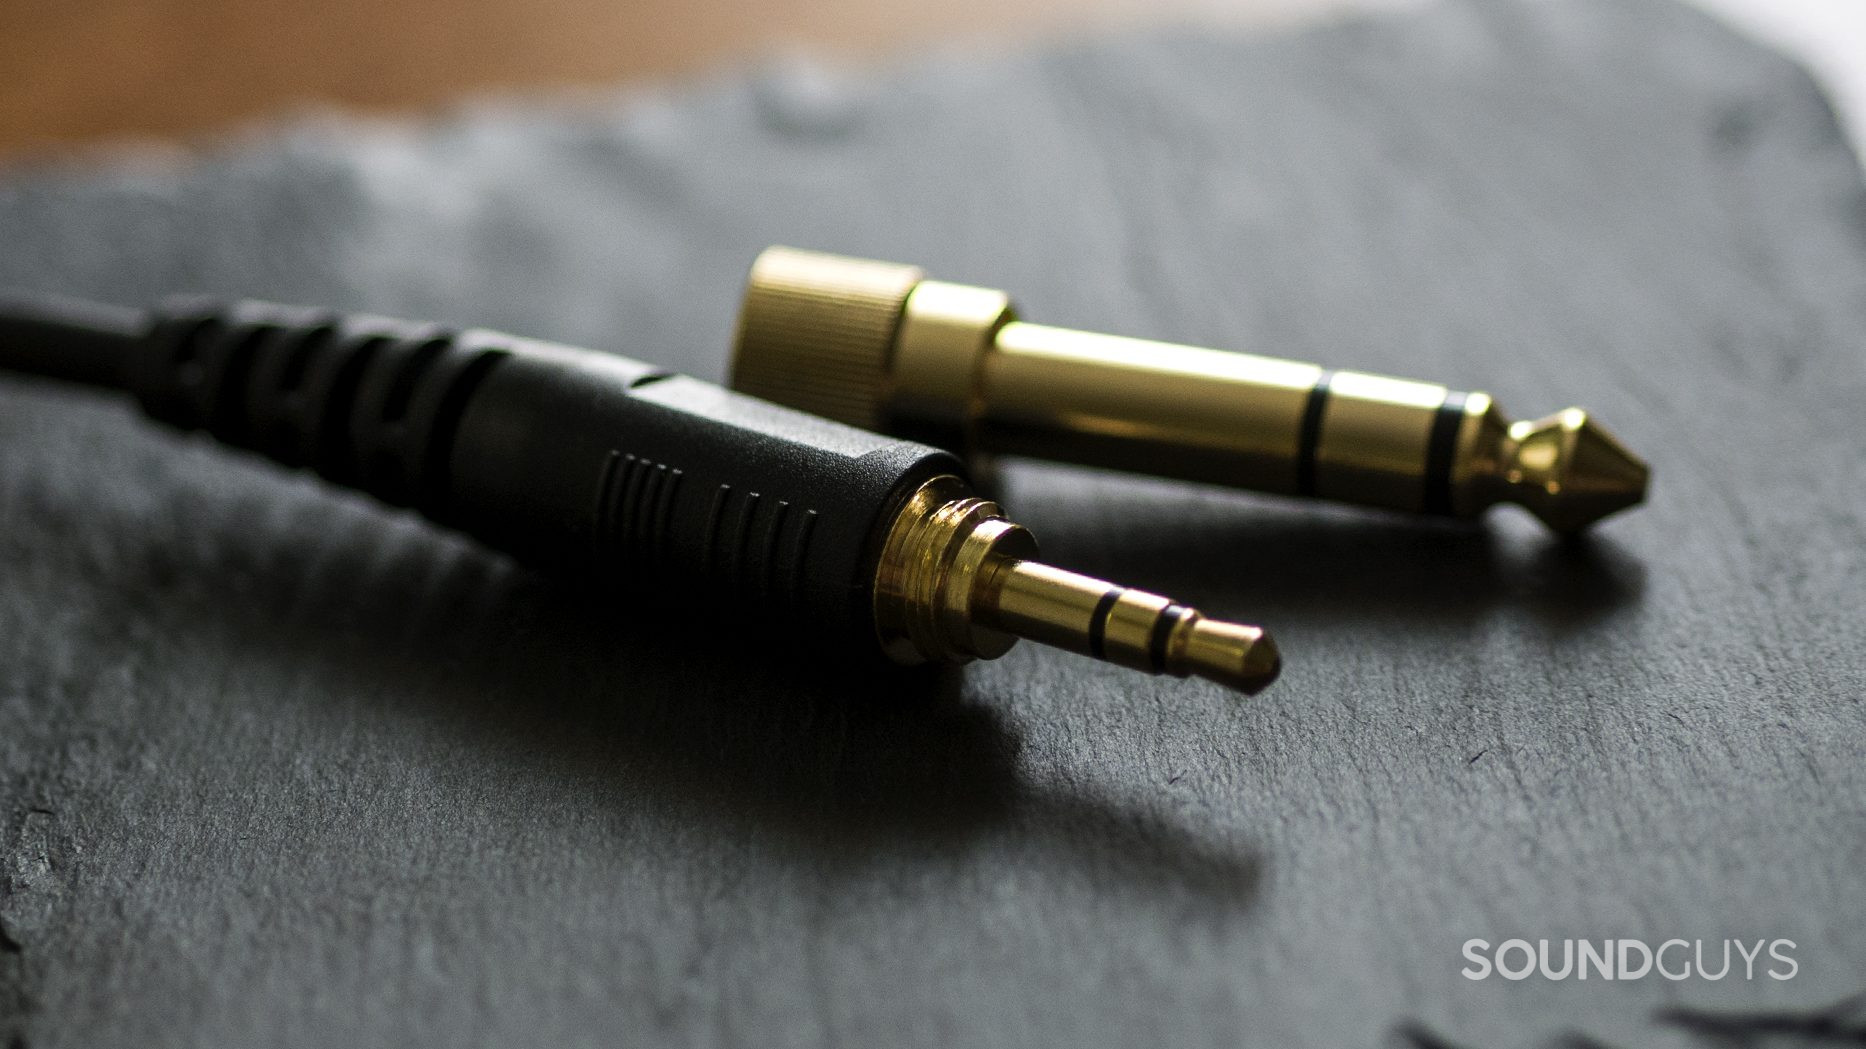 The Beyerdynamic DT 880 PRO connectors and adapters.